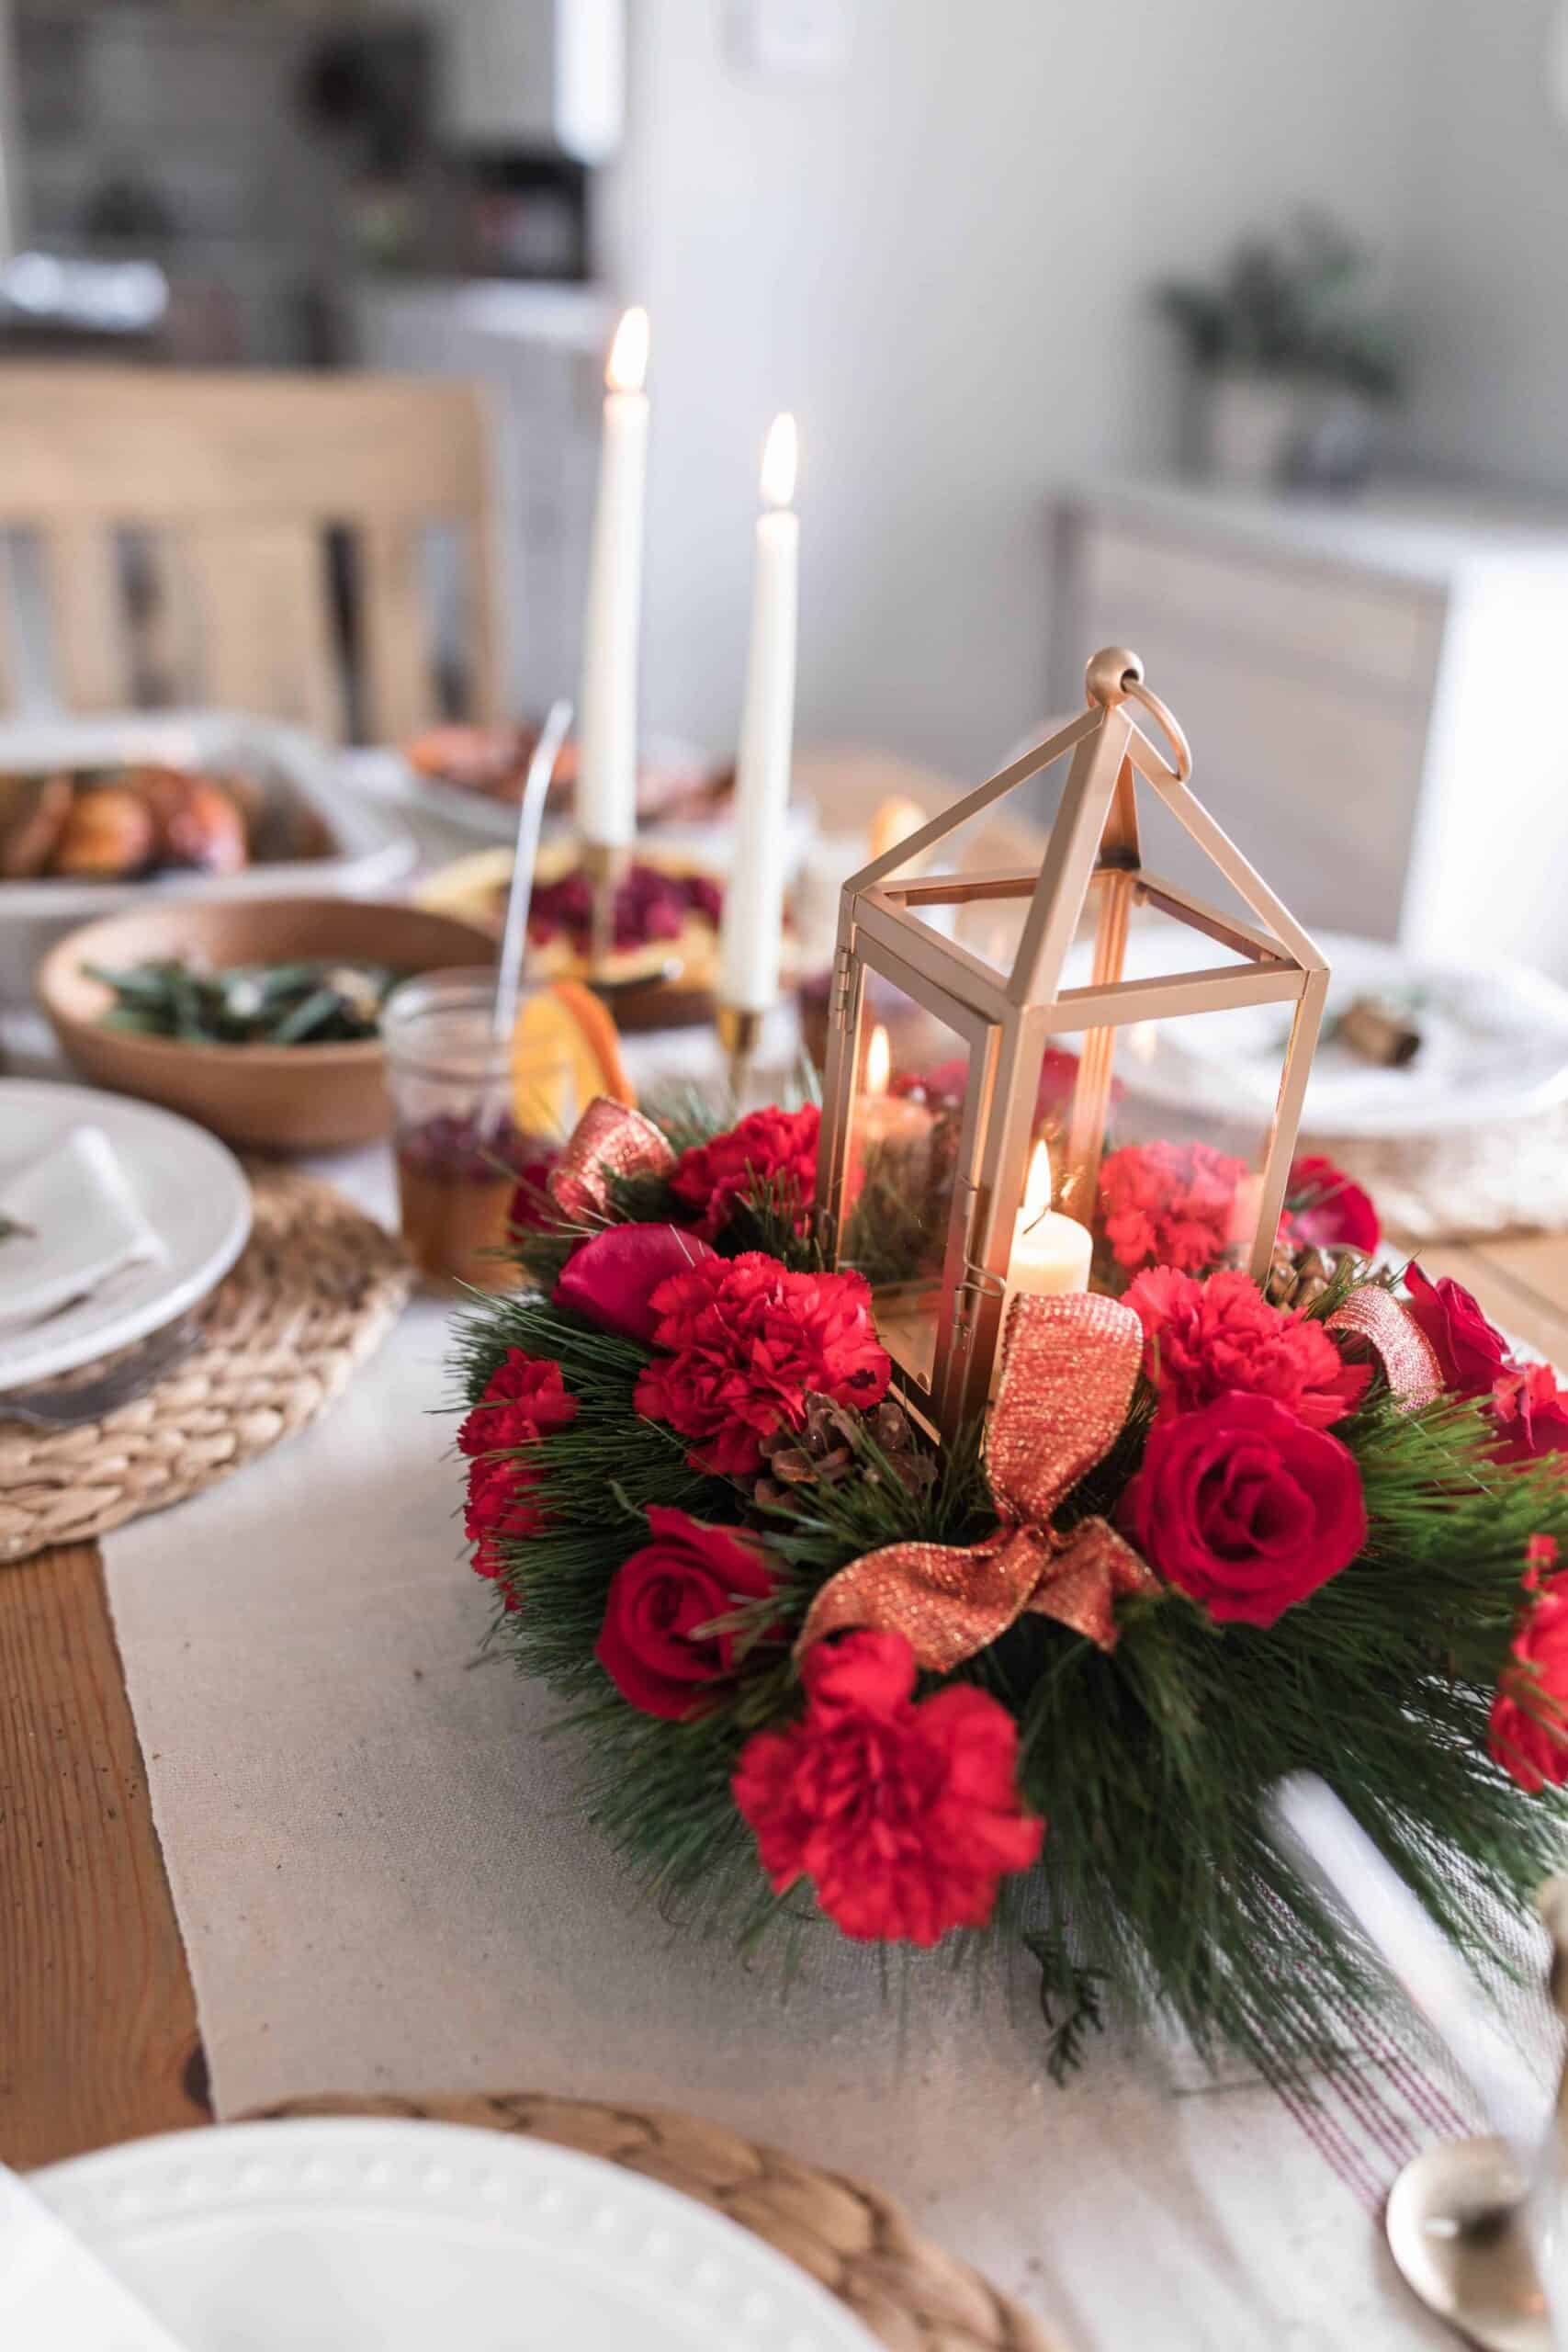 vibrant roses and rustic lantern Christmas centerpiece